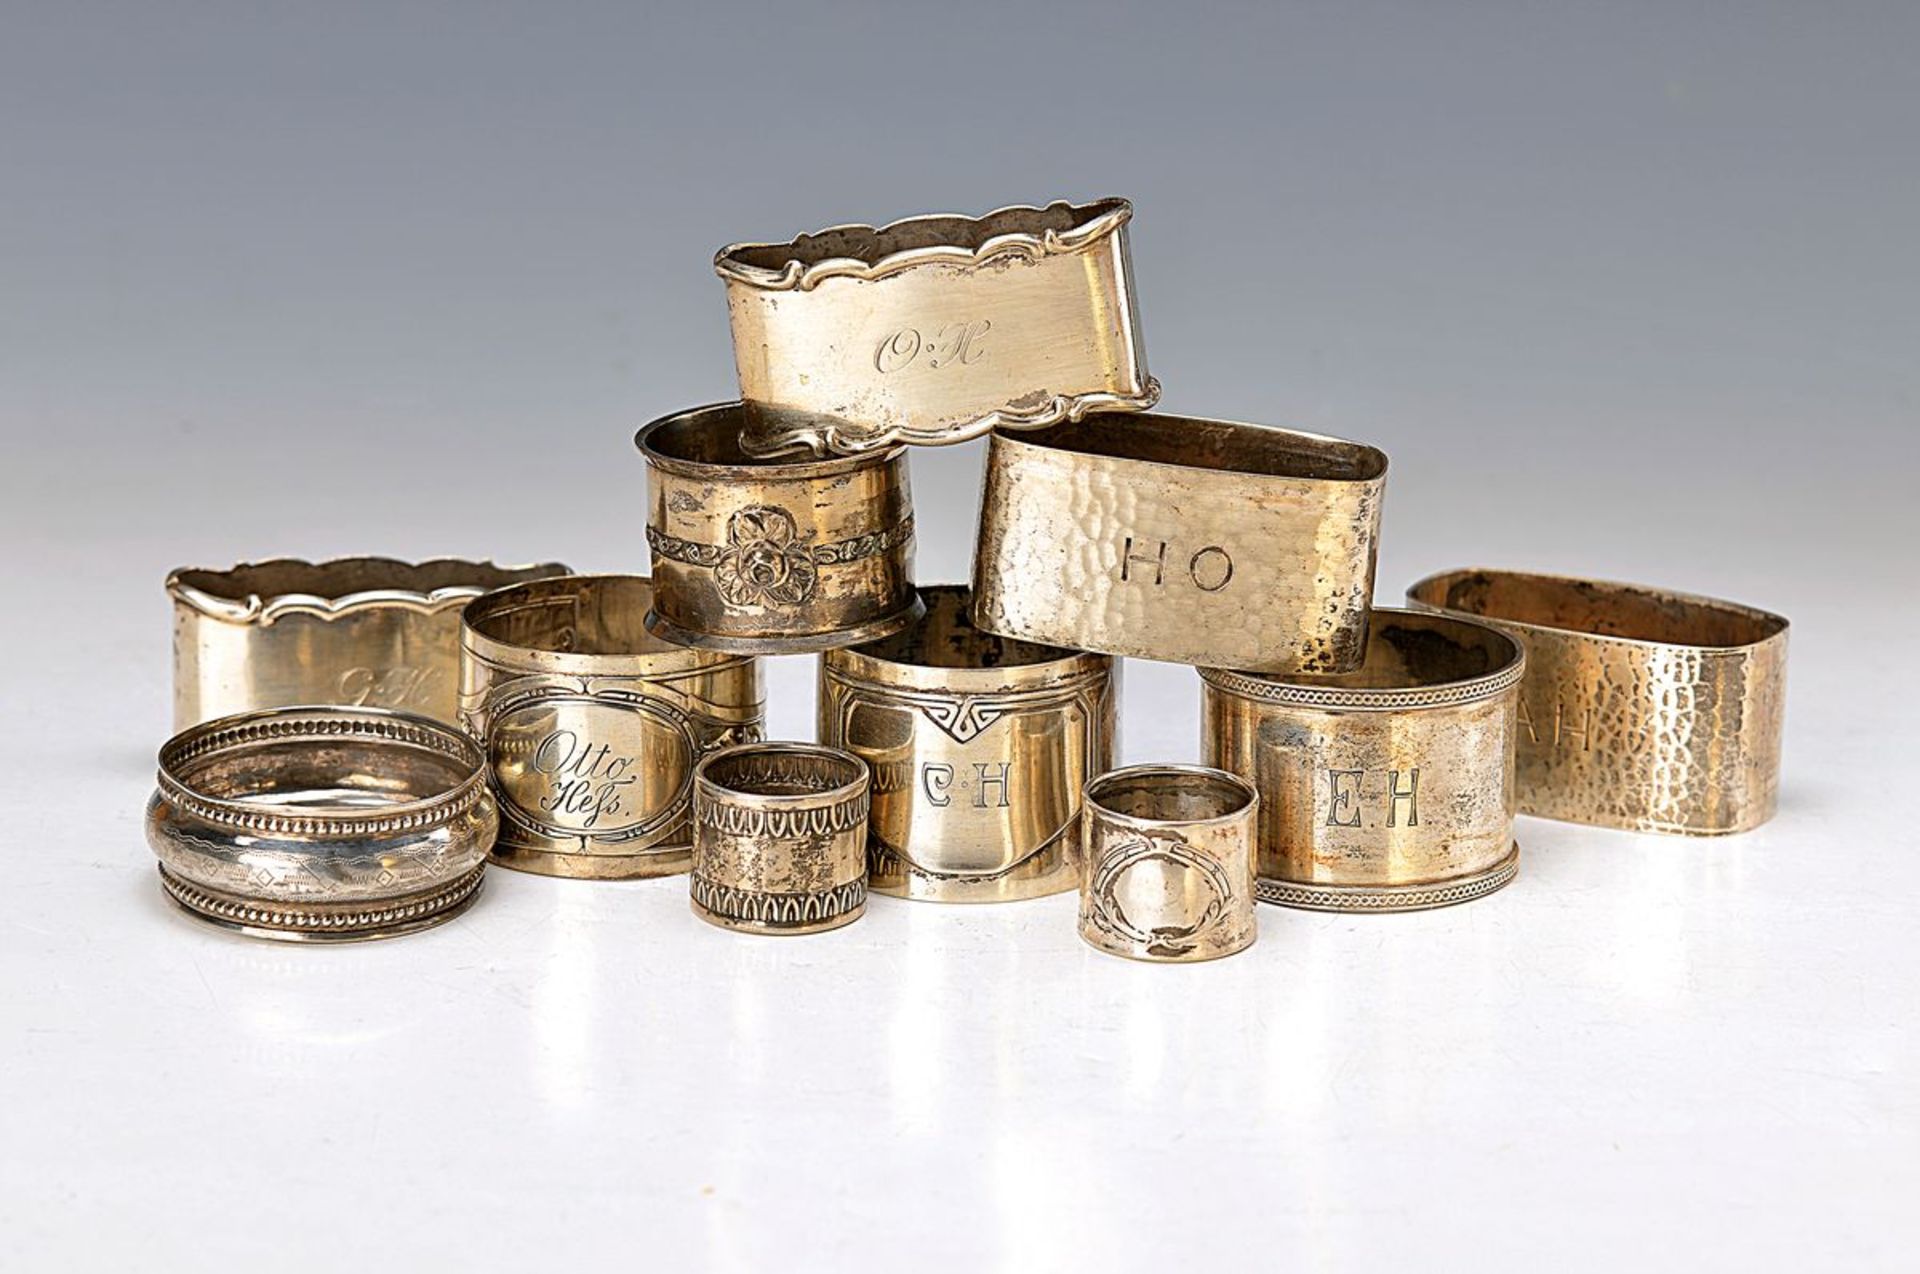 11 napkin rings, German, around 1900/20, mostly 800 or 835 silver, partly monogramm, approx. 70 g,